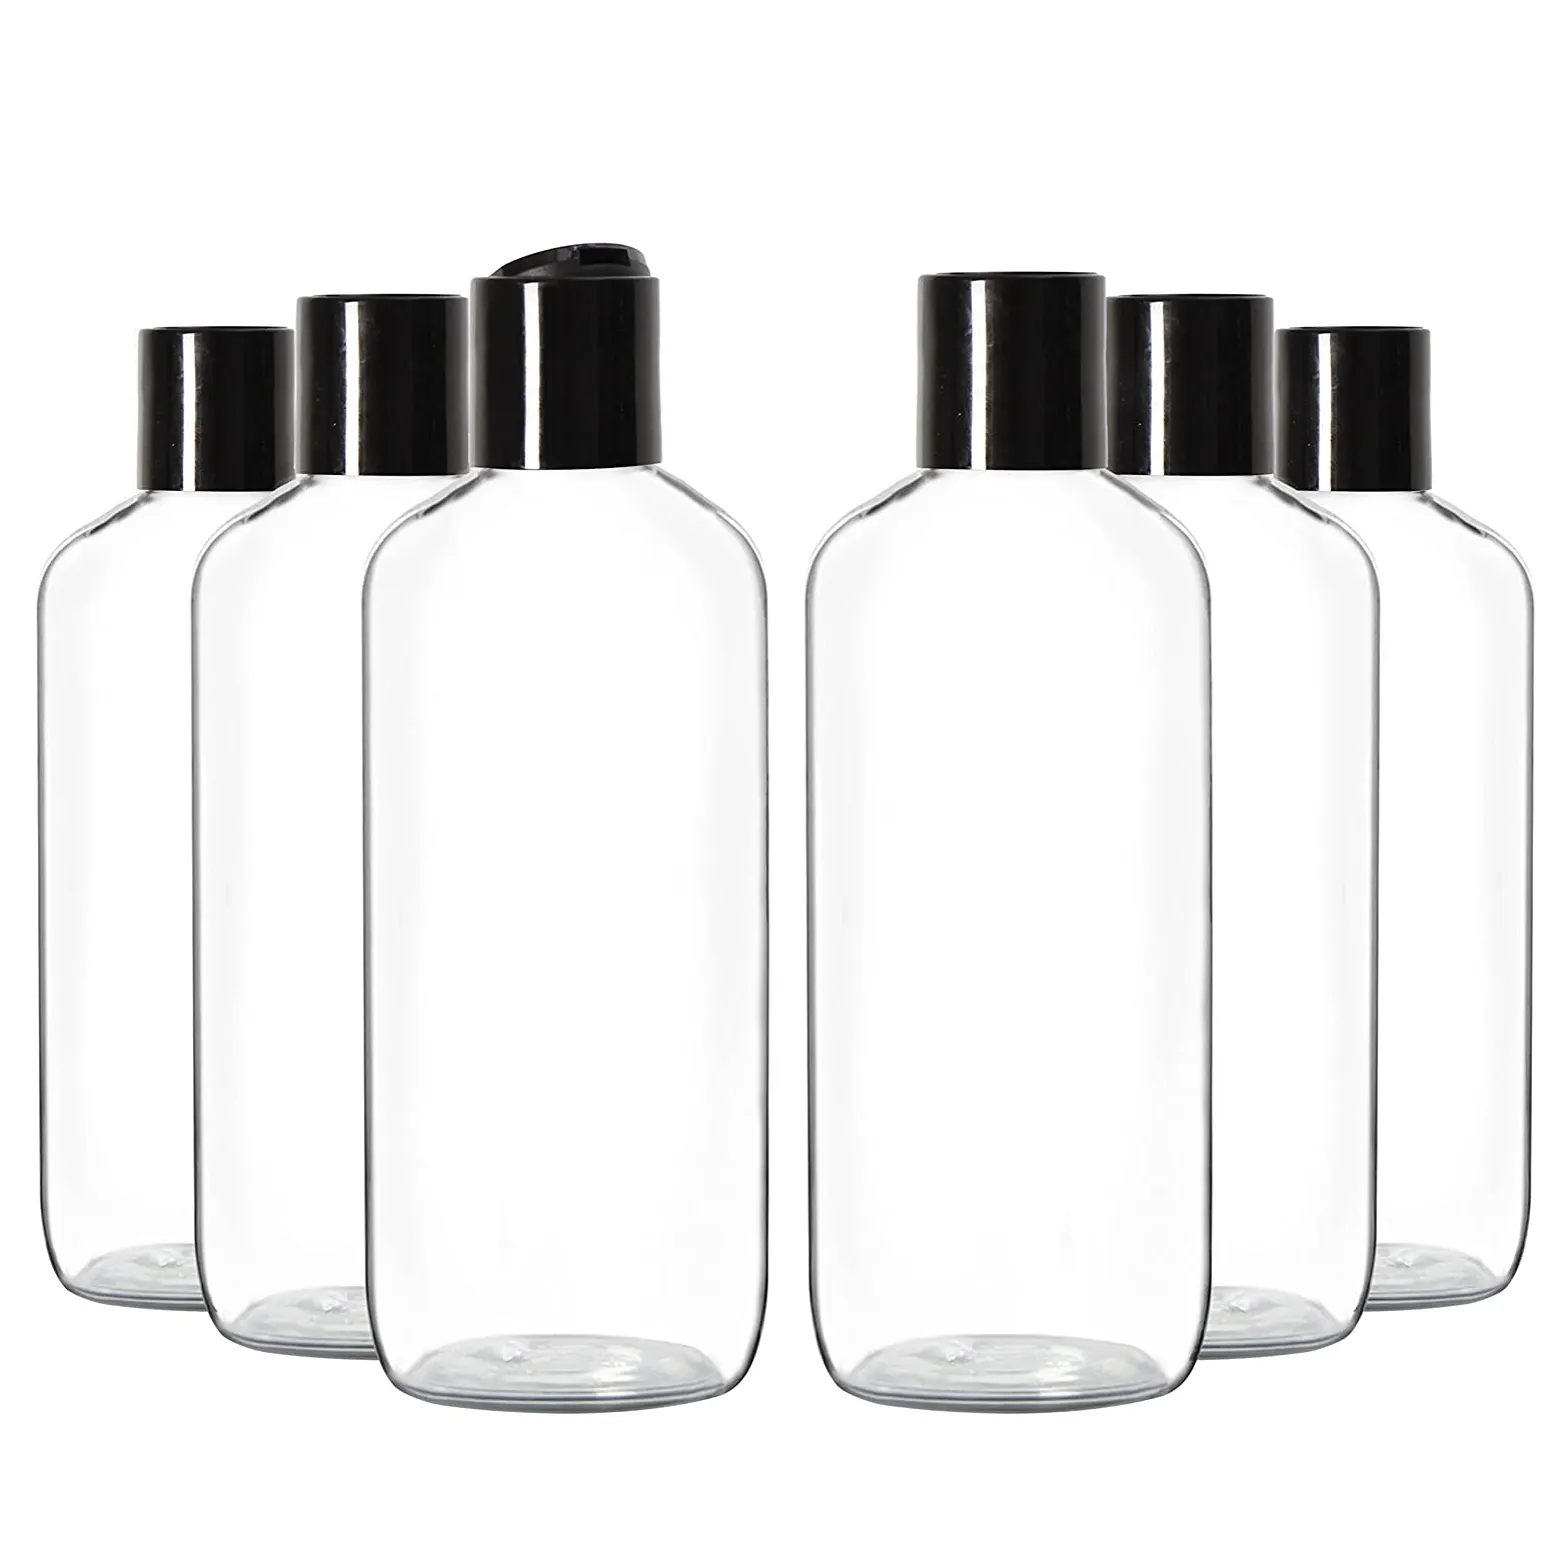 8 Oz Plastic Refillable Clear Travel Squeeze Lotion Containers Disc Cap Press Top Bottles for Shower Gel Shampoo Body Wash